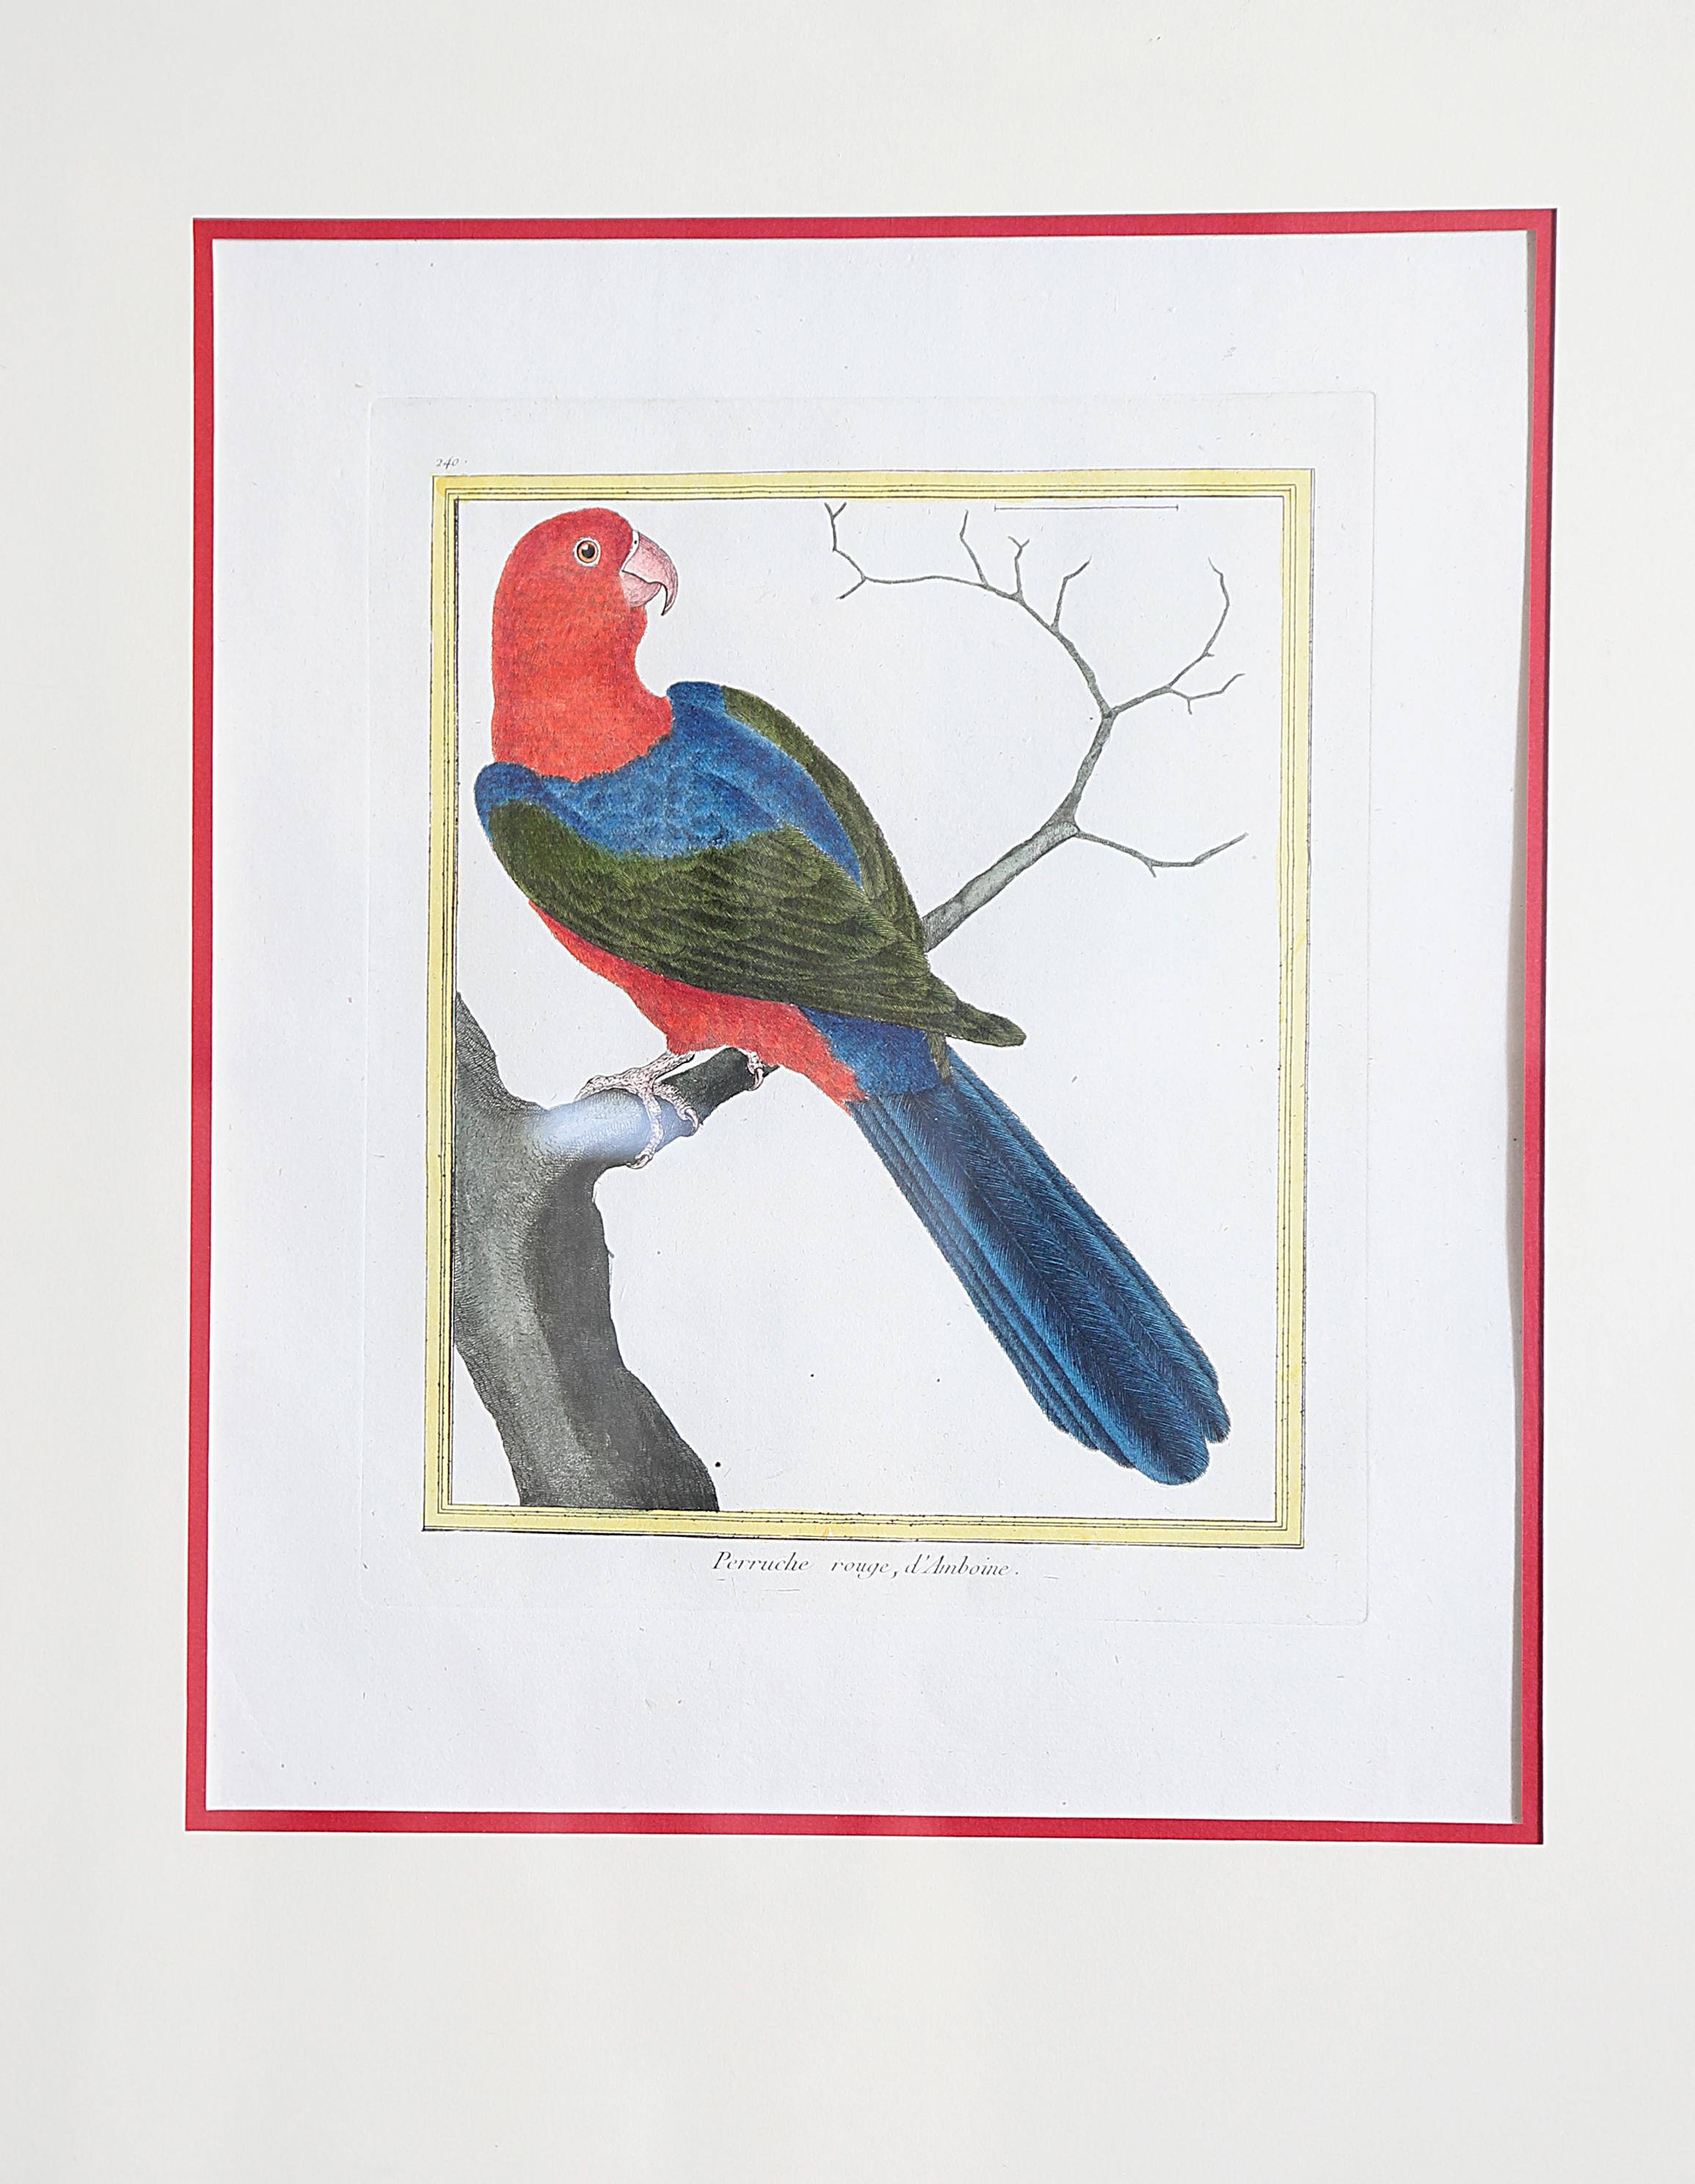 French Hand-Colored Bird Engravings by François Nicolas Martinet